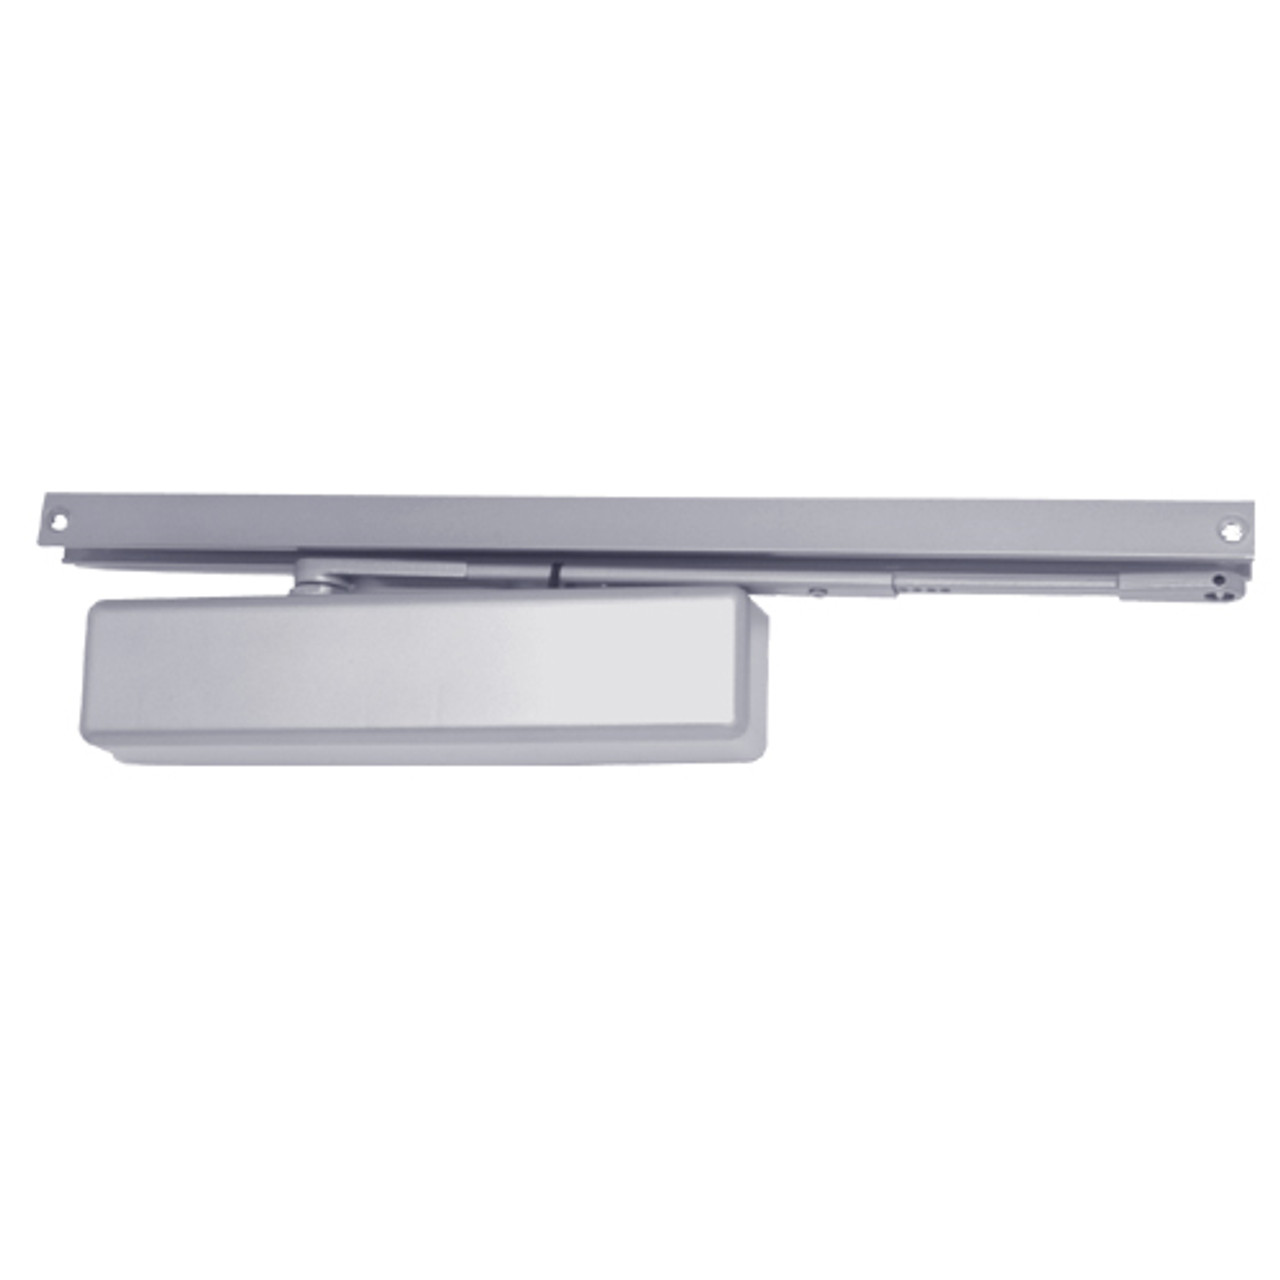 1460T-STD-US26D LCN Surface Mount Door Closer with Standard Arm in Satin Chrome Finish